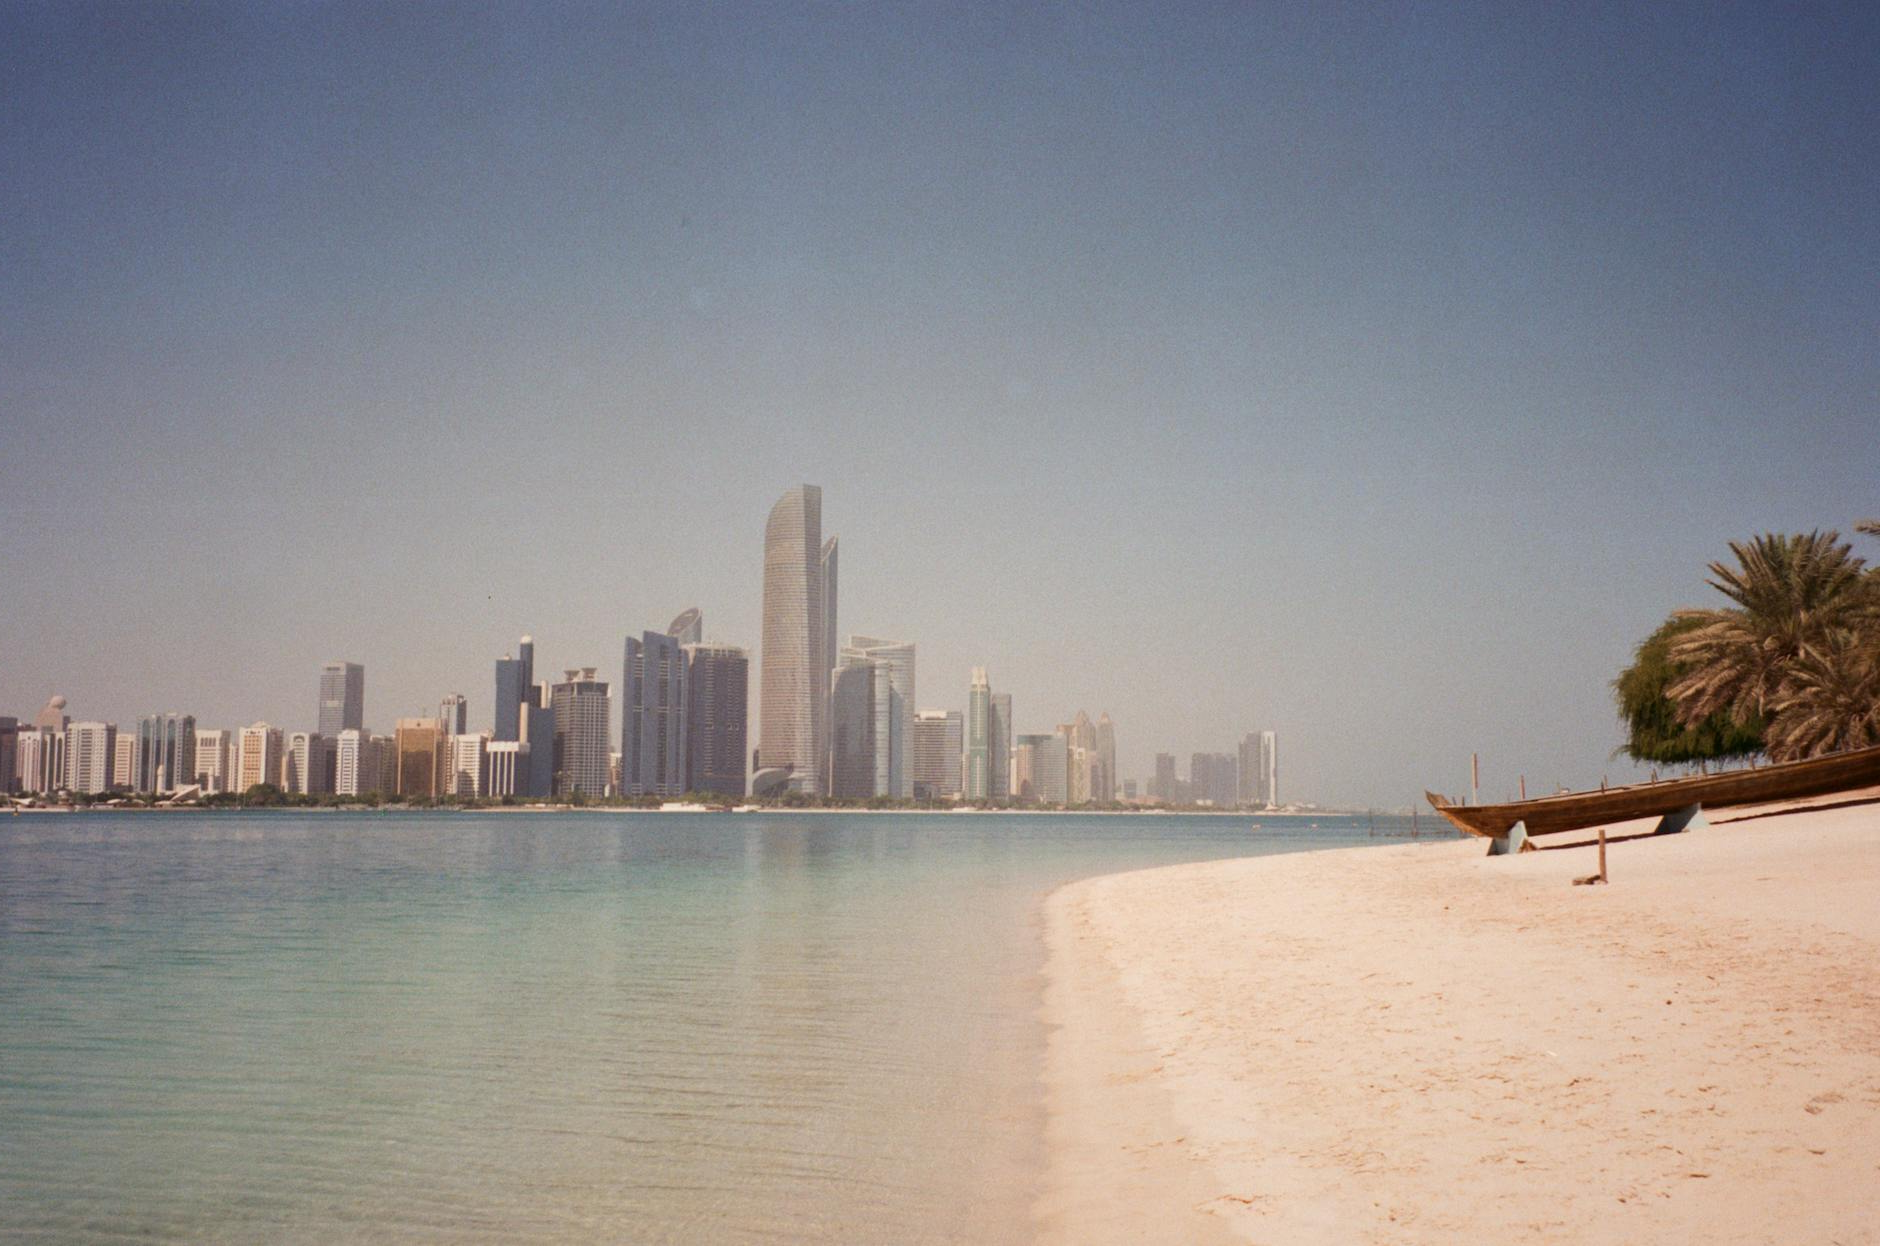 Empty Beach and Sea with Cityscape of Abu Dhabi Skyline in the Distance